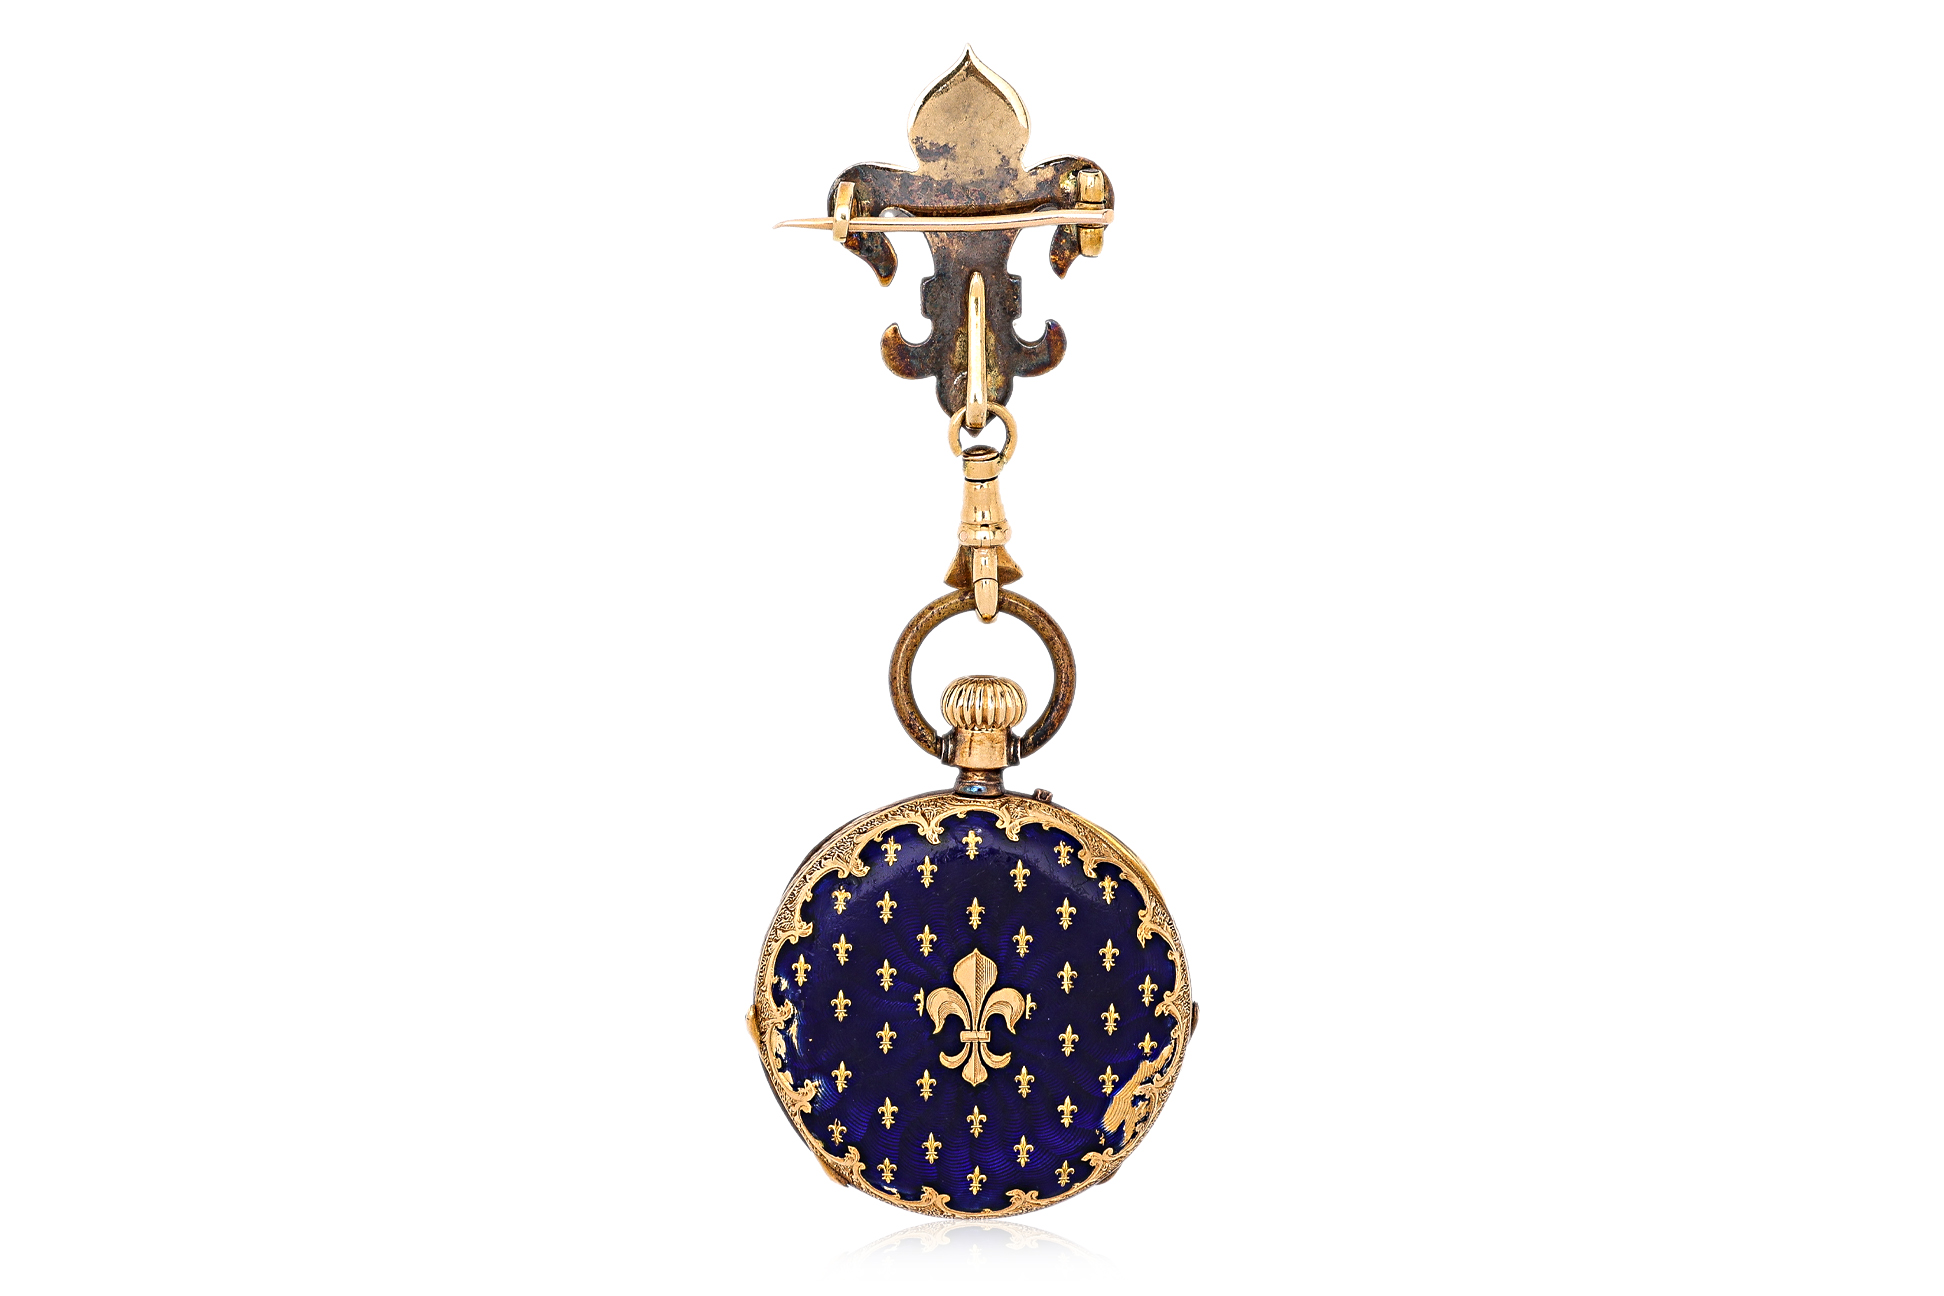 A LADIES GOLD AND ENAMEL EVENING POCKET WATCH - Image 3 of 5